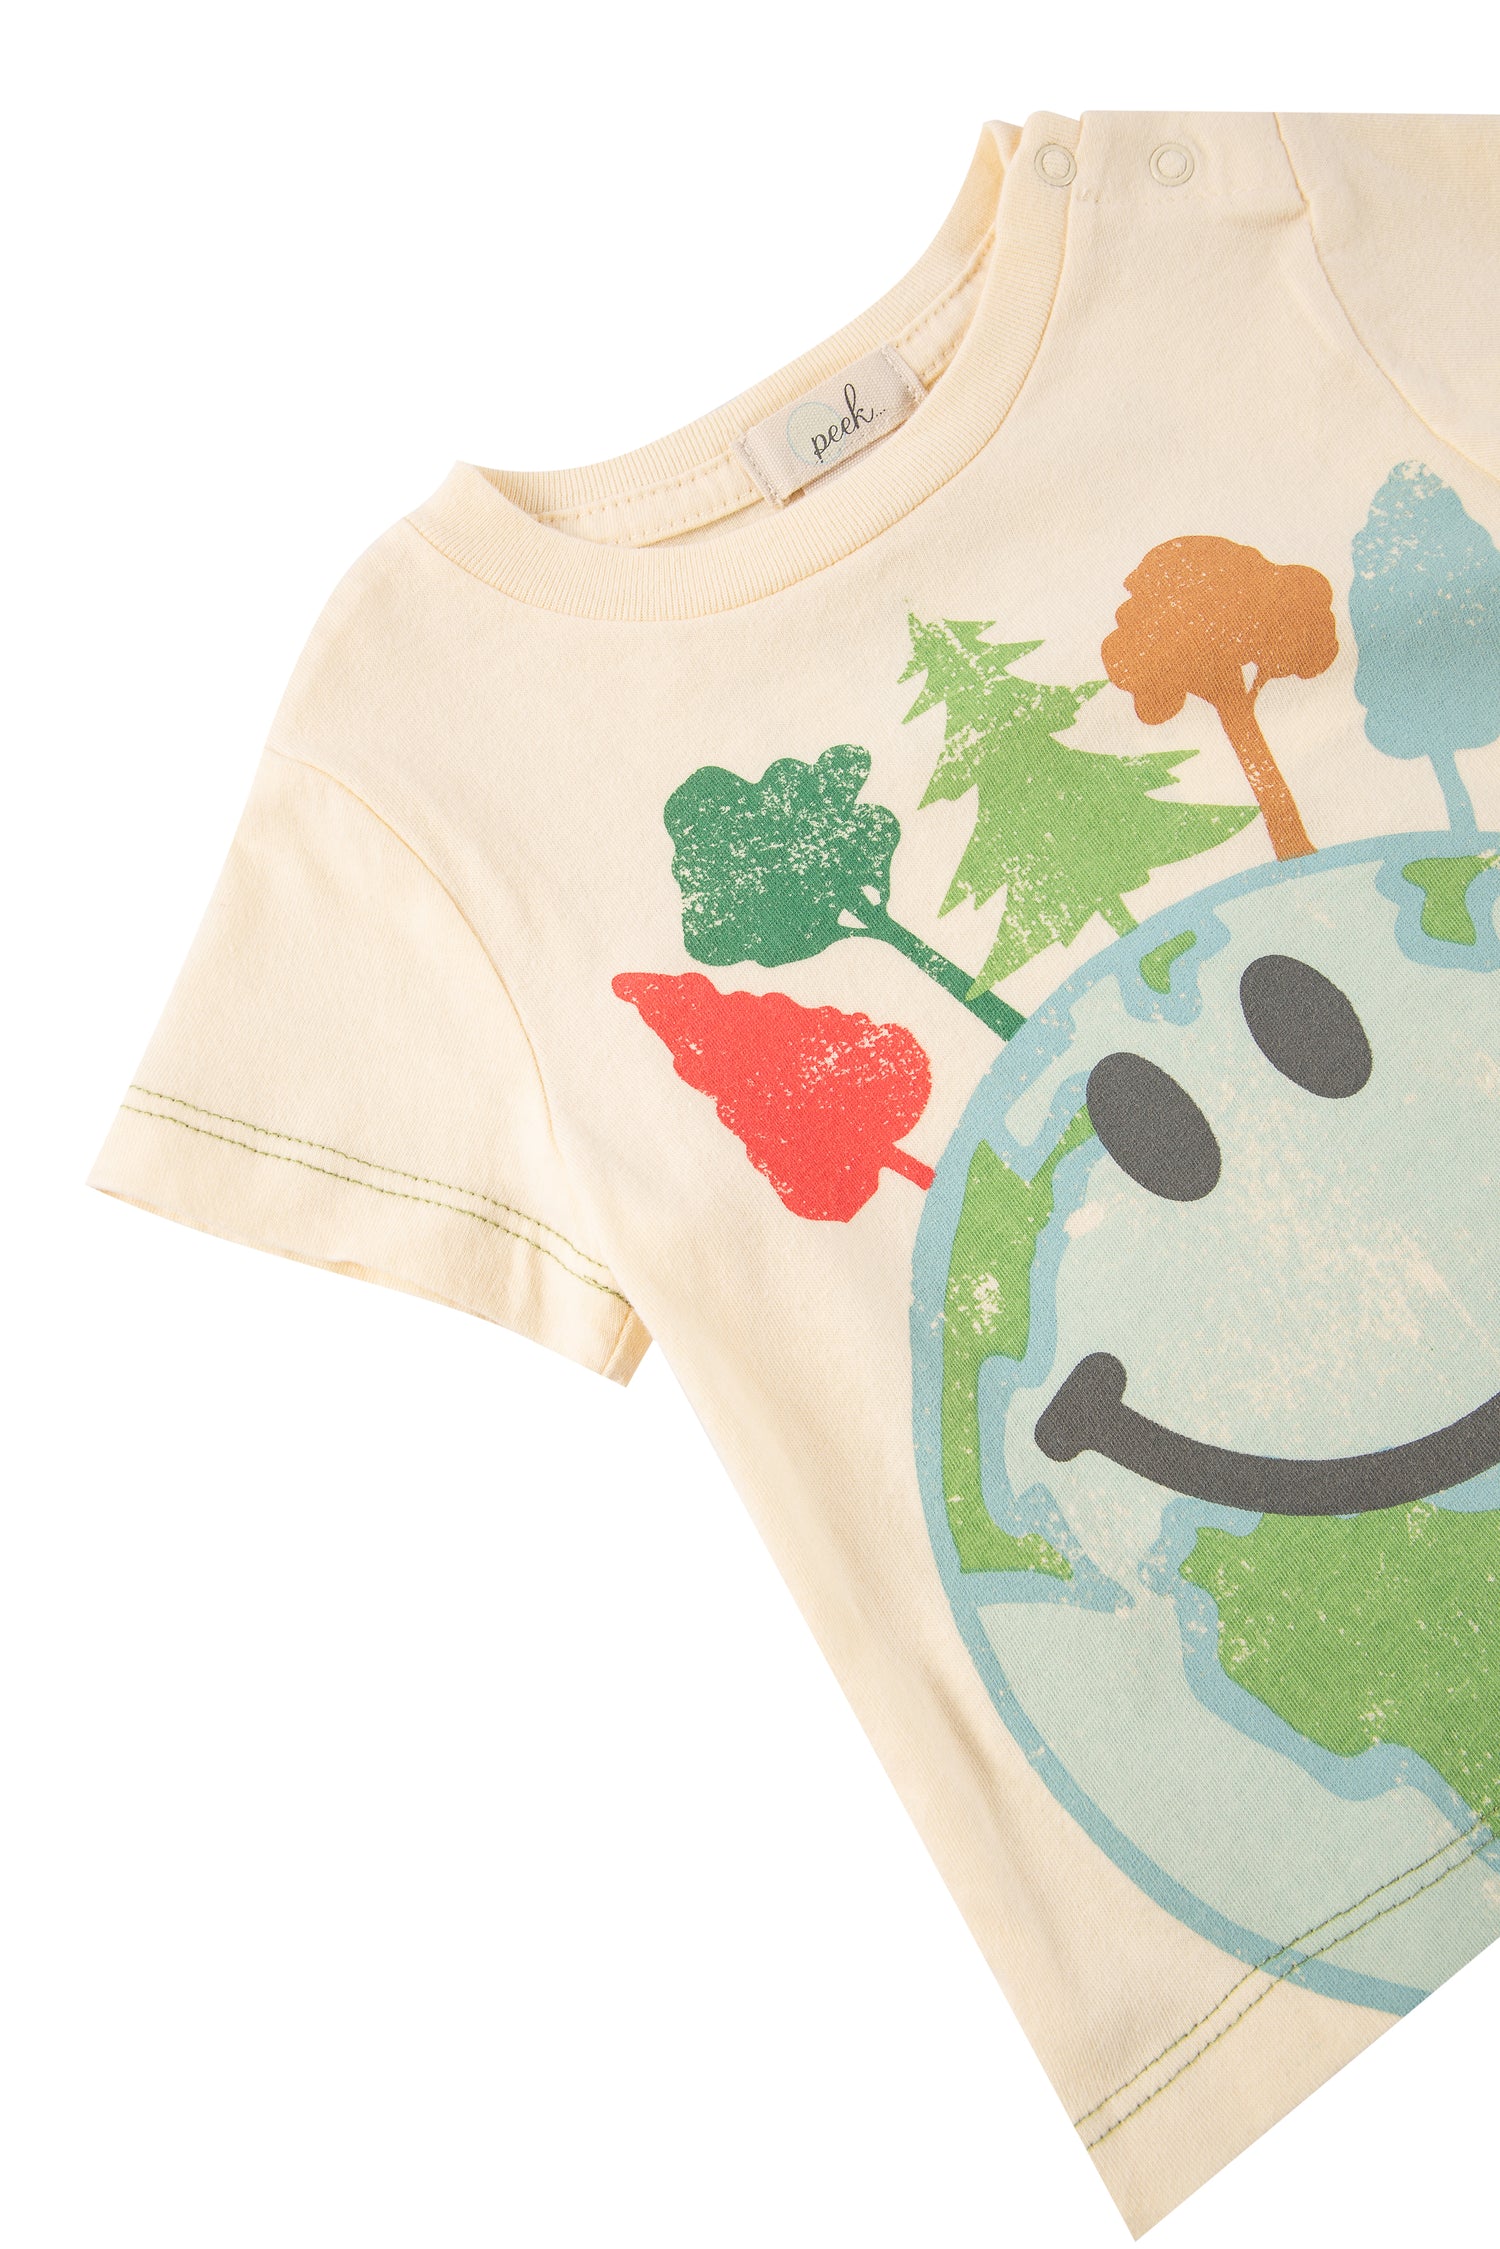 Close up of off-white t-shirt with multi-colored trees and globe with a smiley face